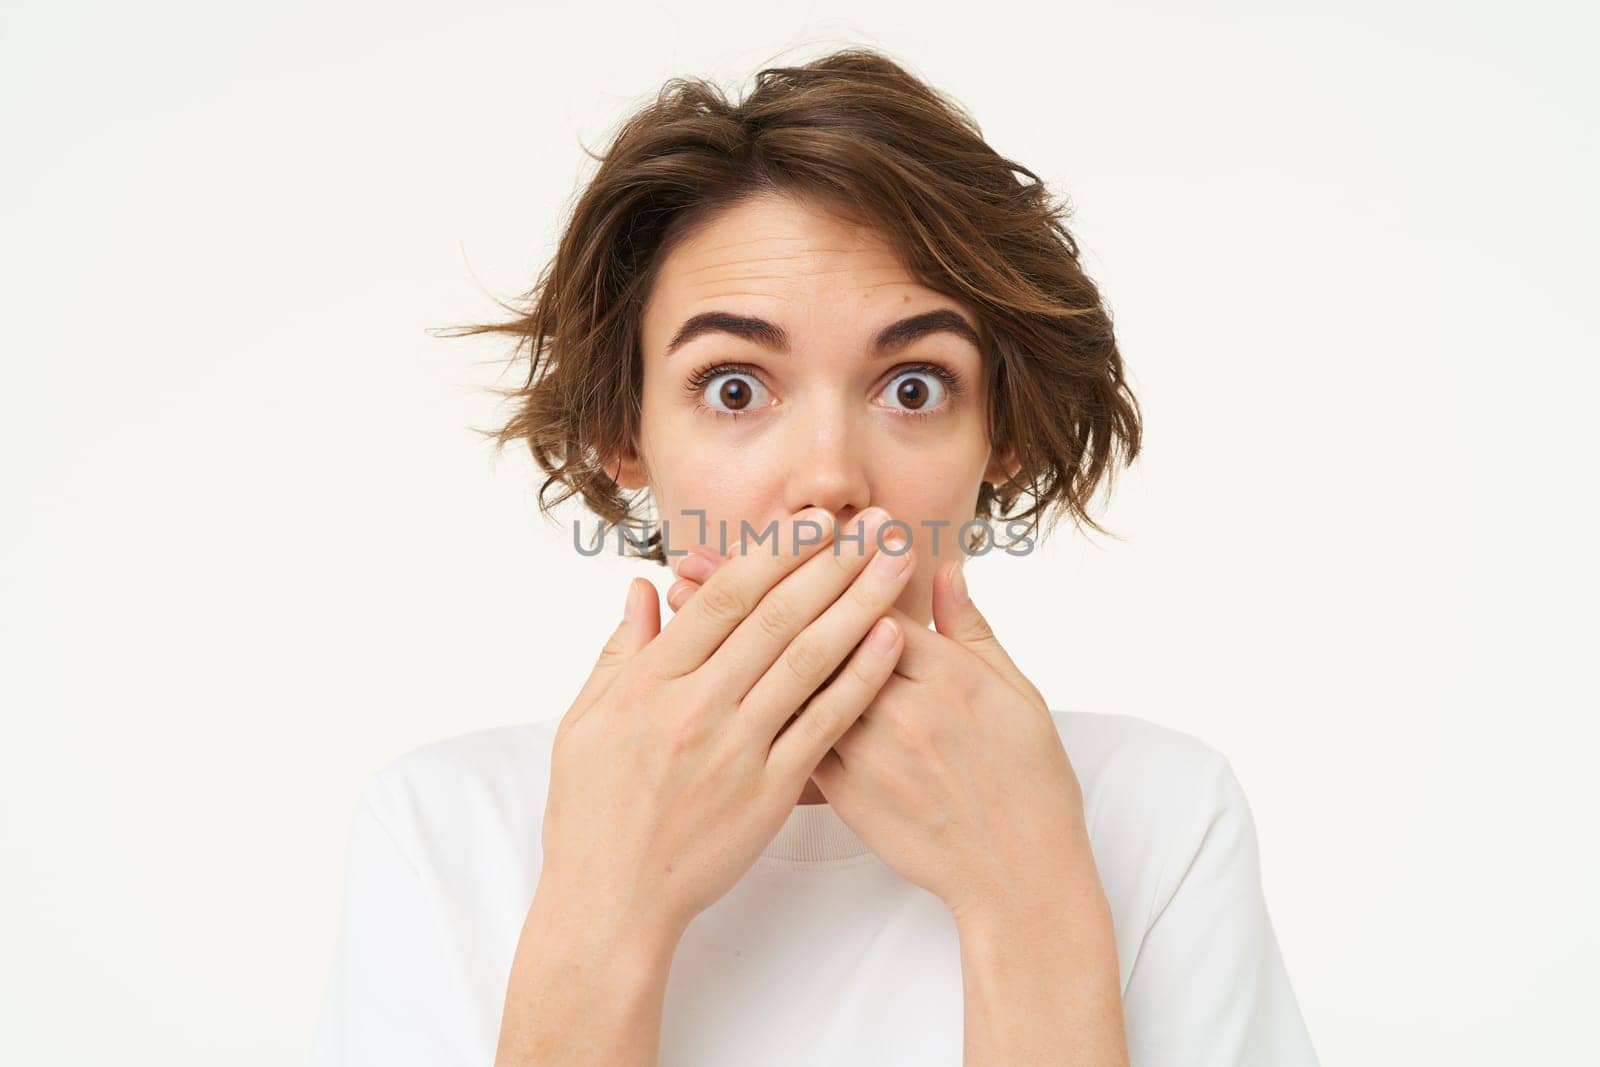 Image of brunette woman shuts her mouth, looks surprised, puts hands over her lips, stands over white background.